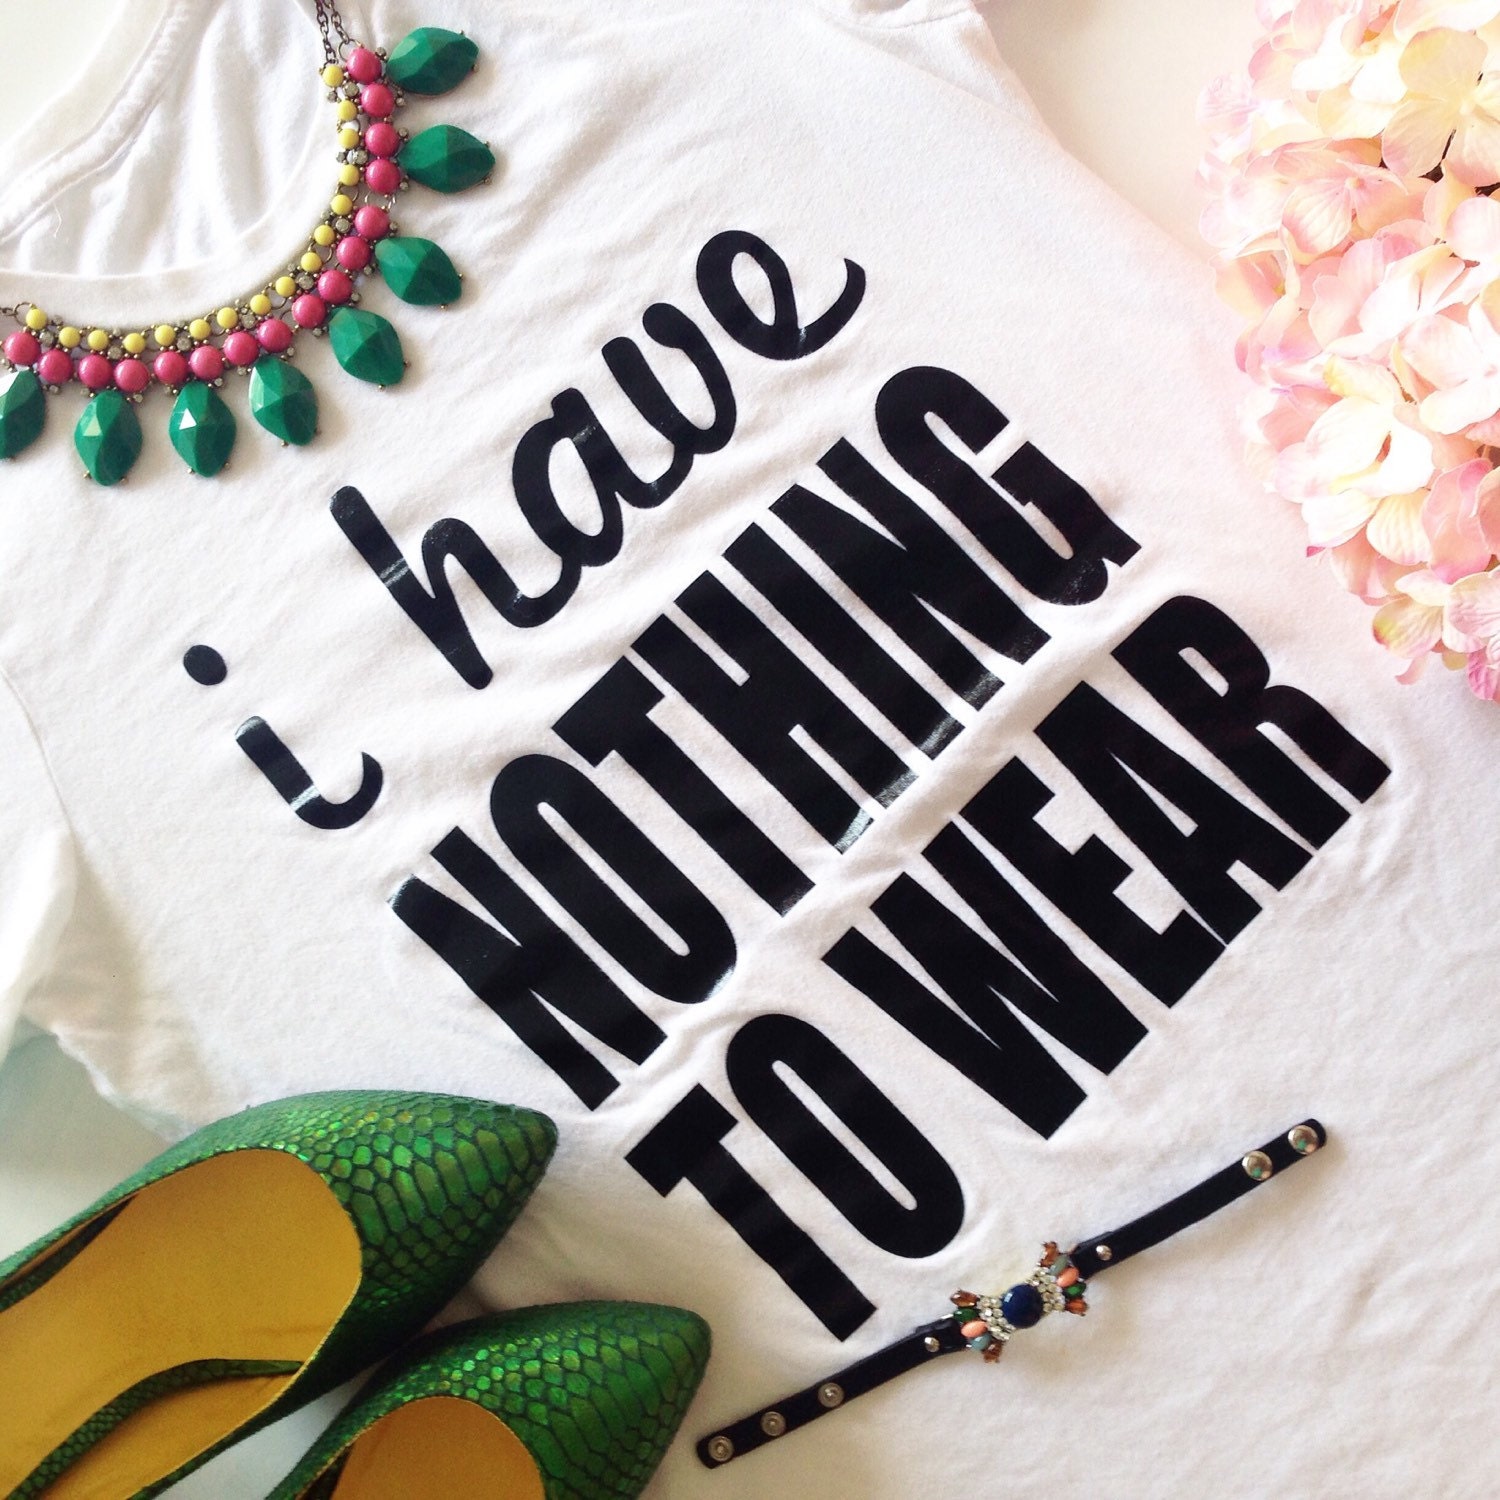 I Have Nothing To Wear  Fashion /  Statement Tee / Statement Tshirt / Graphic Tee / Graphic Tshirt